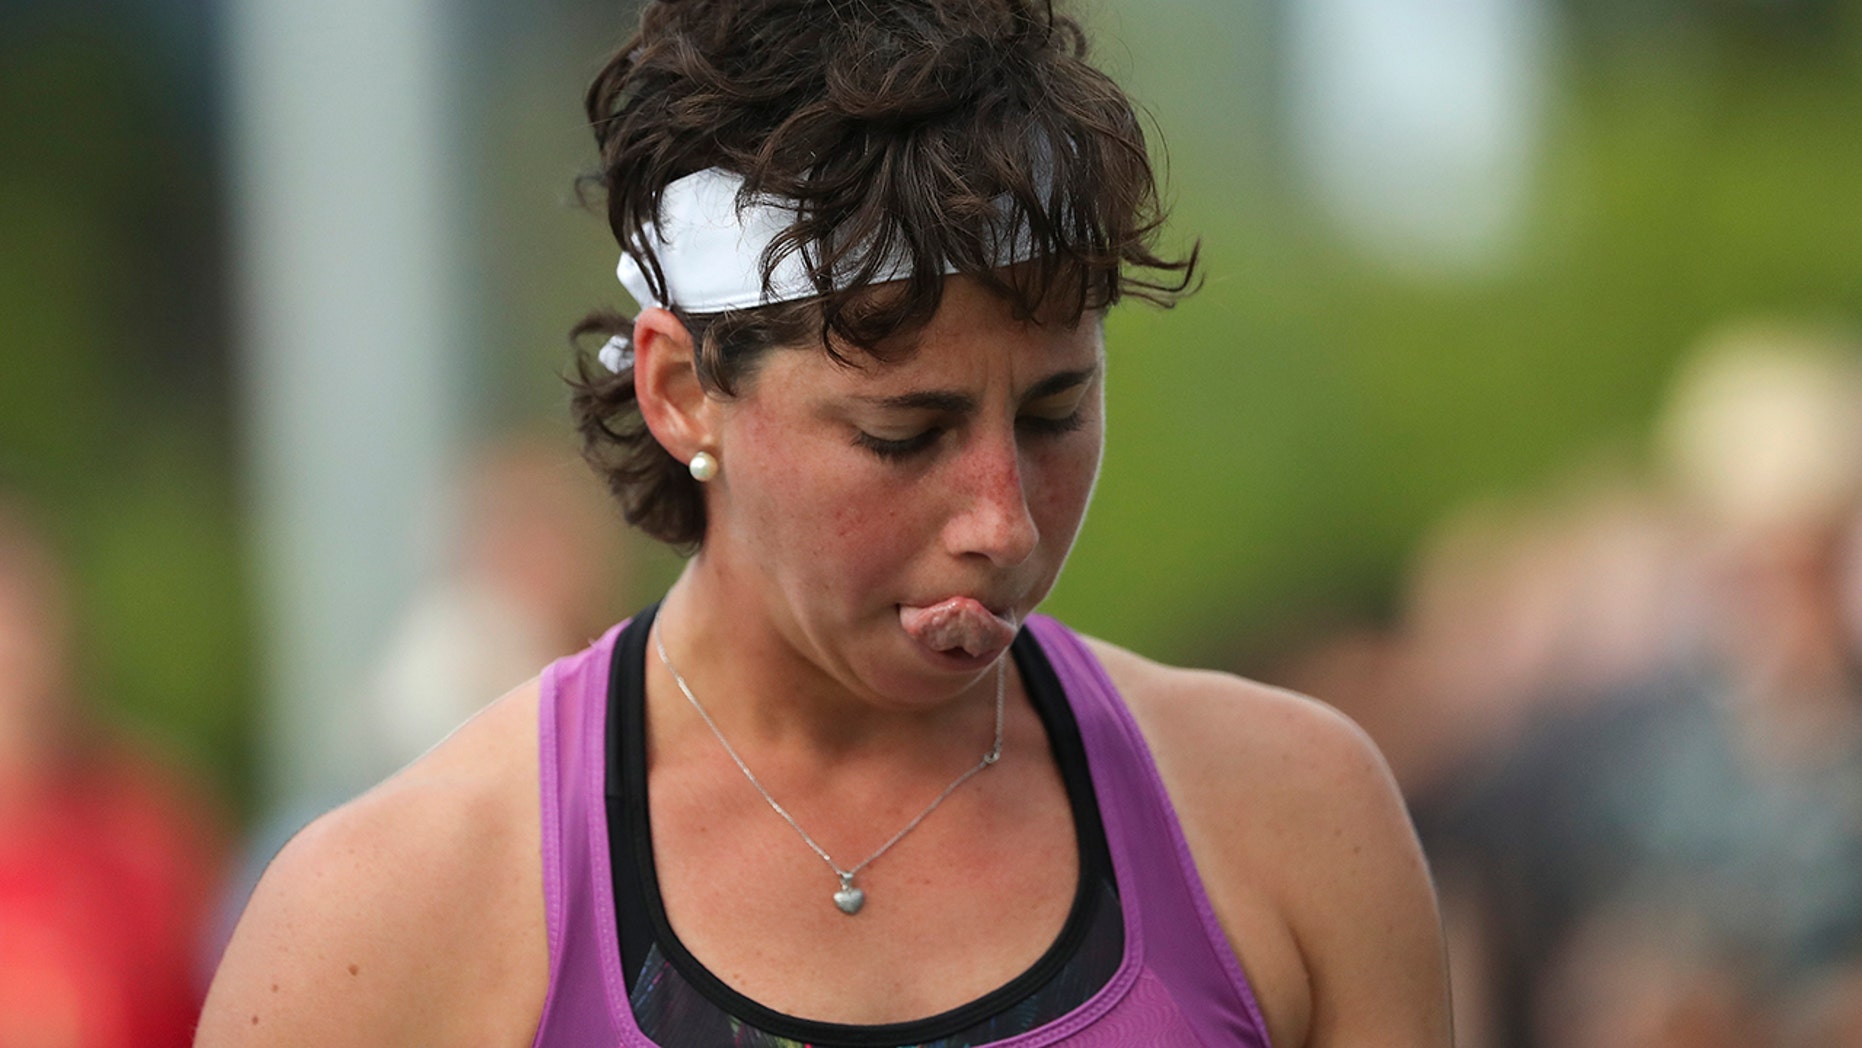 Carla Suarez Navarro, of Spain, reacts after losing a point to Timea Babos, of Hungary, during the first round of the US Open tennis tournament Tuesday, Aug. 27, 2019, in New York. (AP Photo/Eduardo Munoz Alvarez)